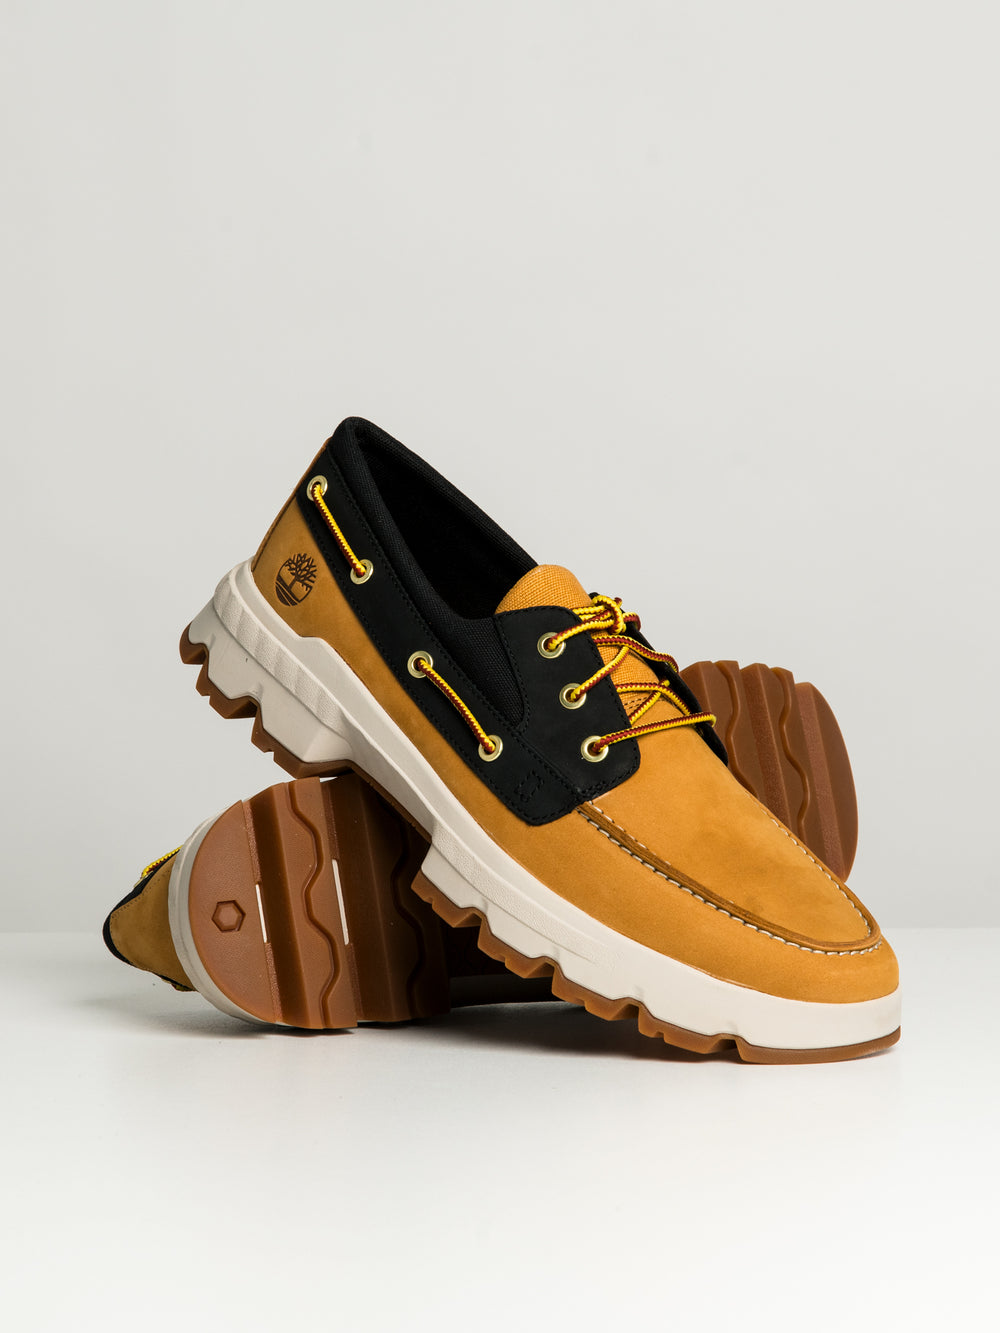 CHAUSSURES TIMBERLAND ULTRA MOC TOE OXFORD POUR HOMMES - DÉSTOCKAGE